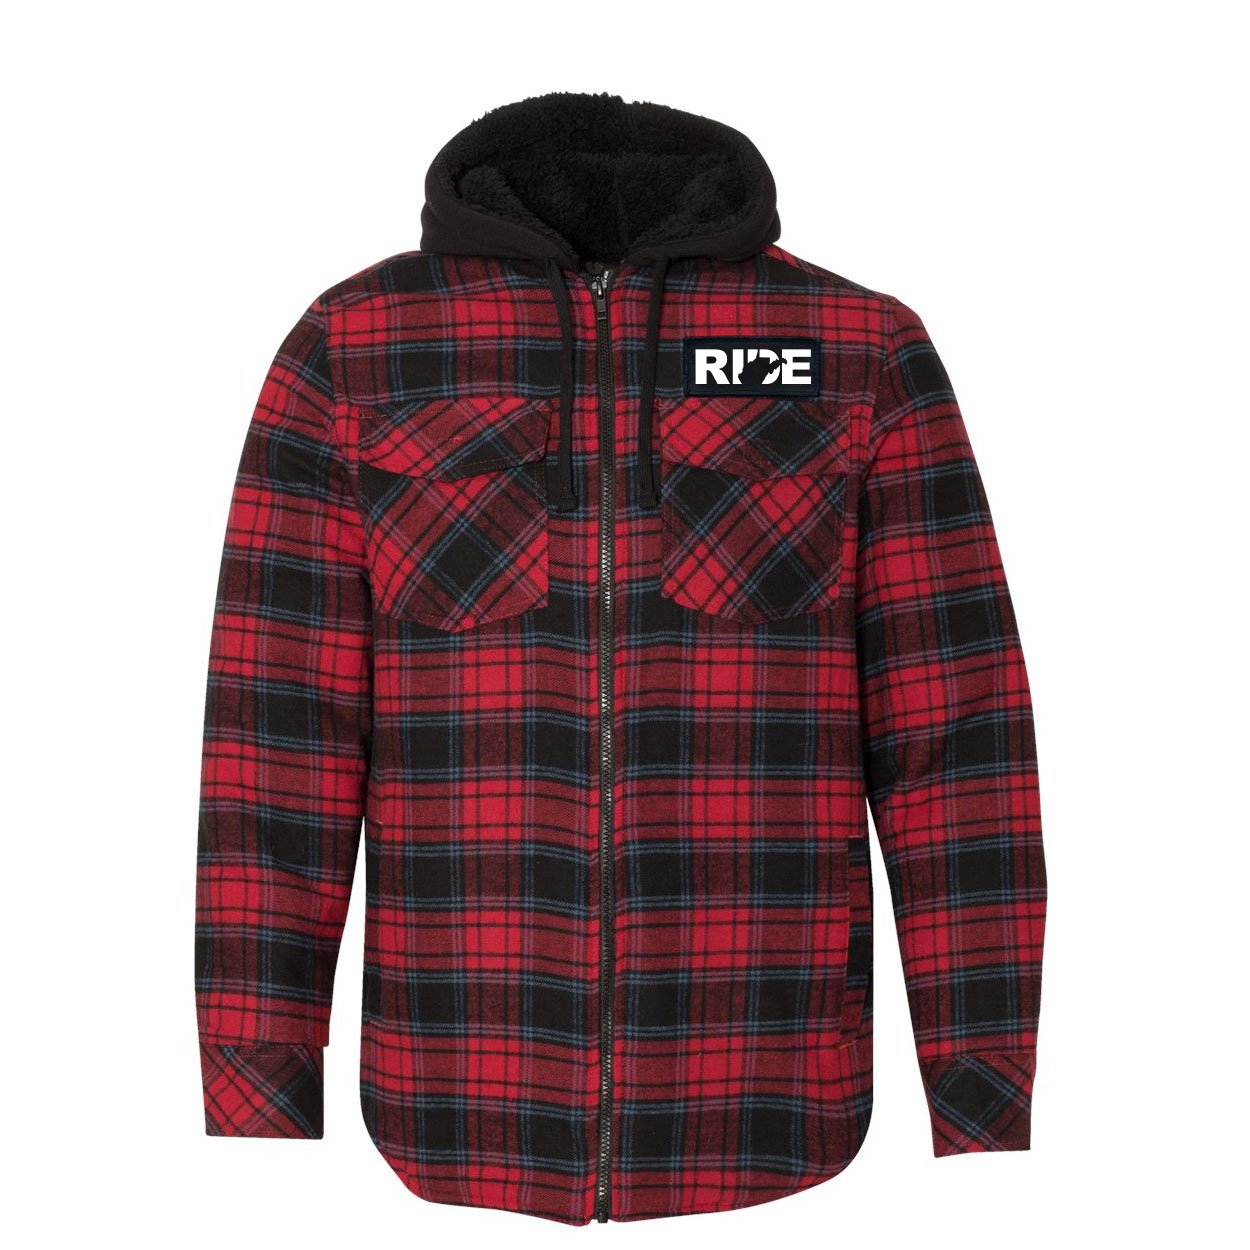 Ride West Virginia Classic Unisex Full Zip Woven Patch Hooded Flannel Jacket Red/Black Buffalo (White Logo)